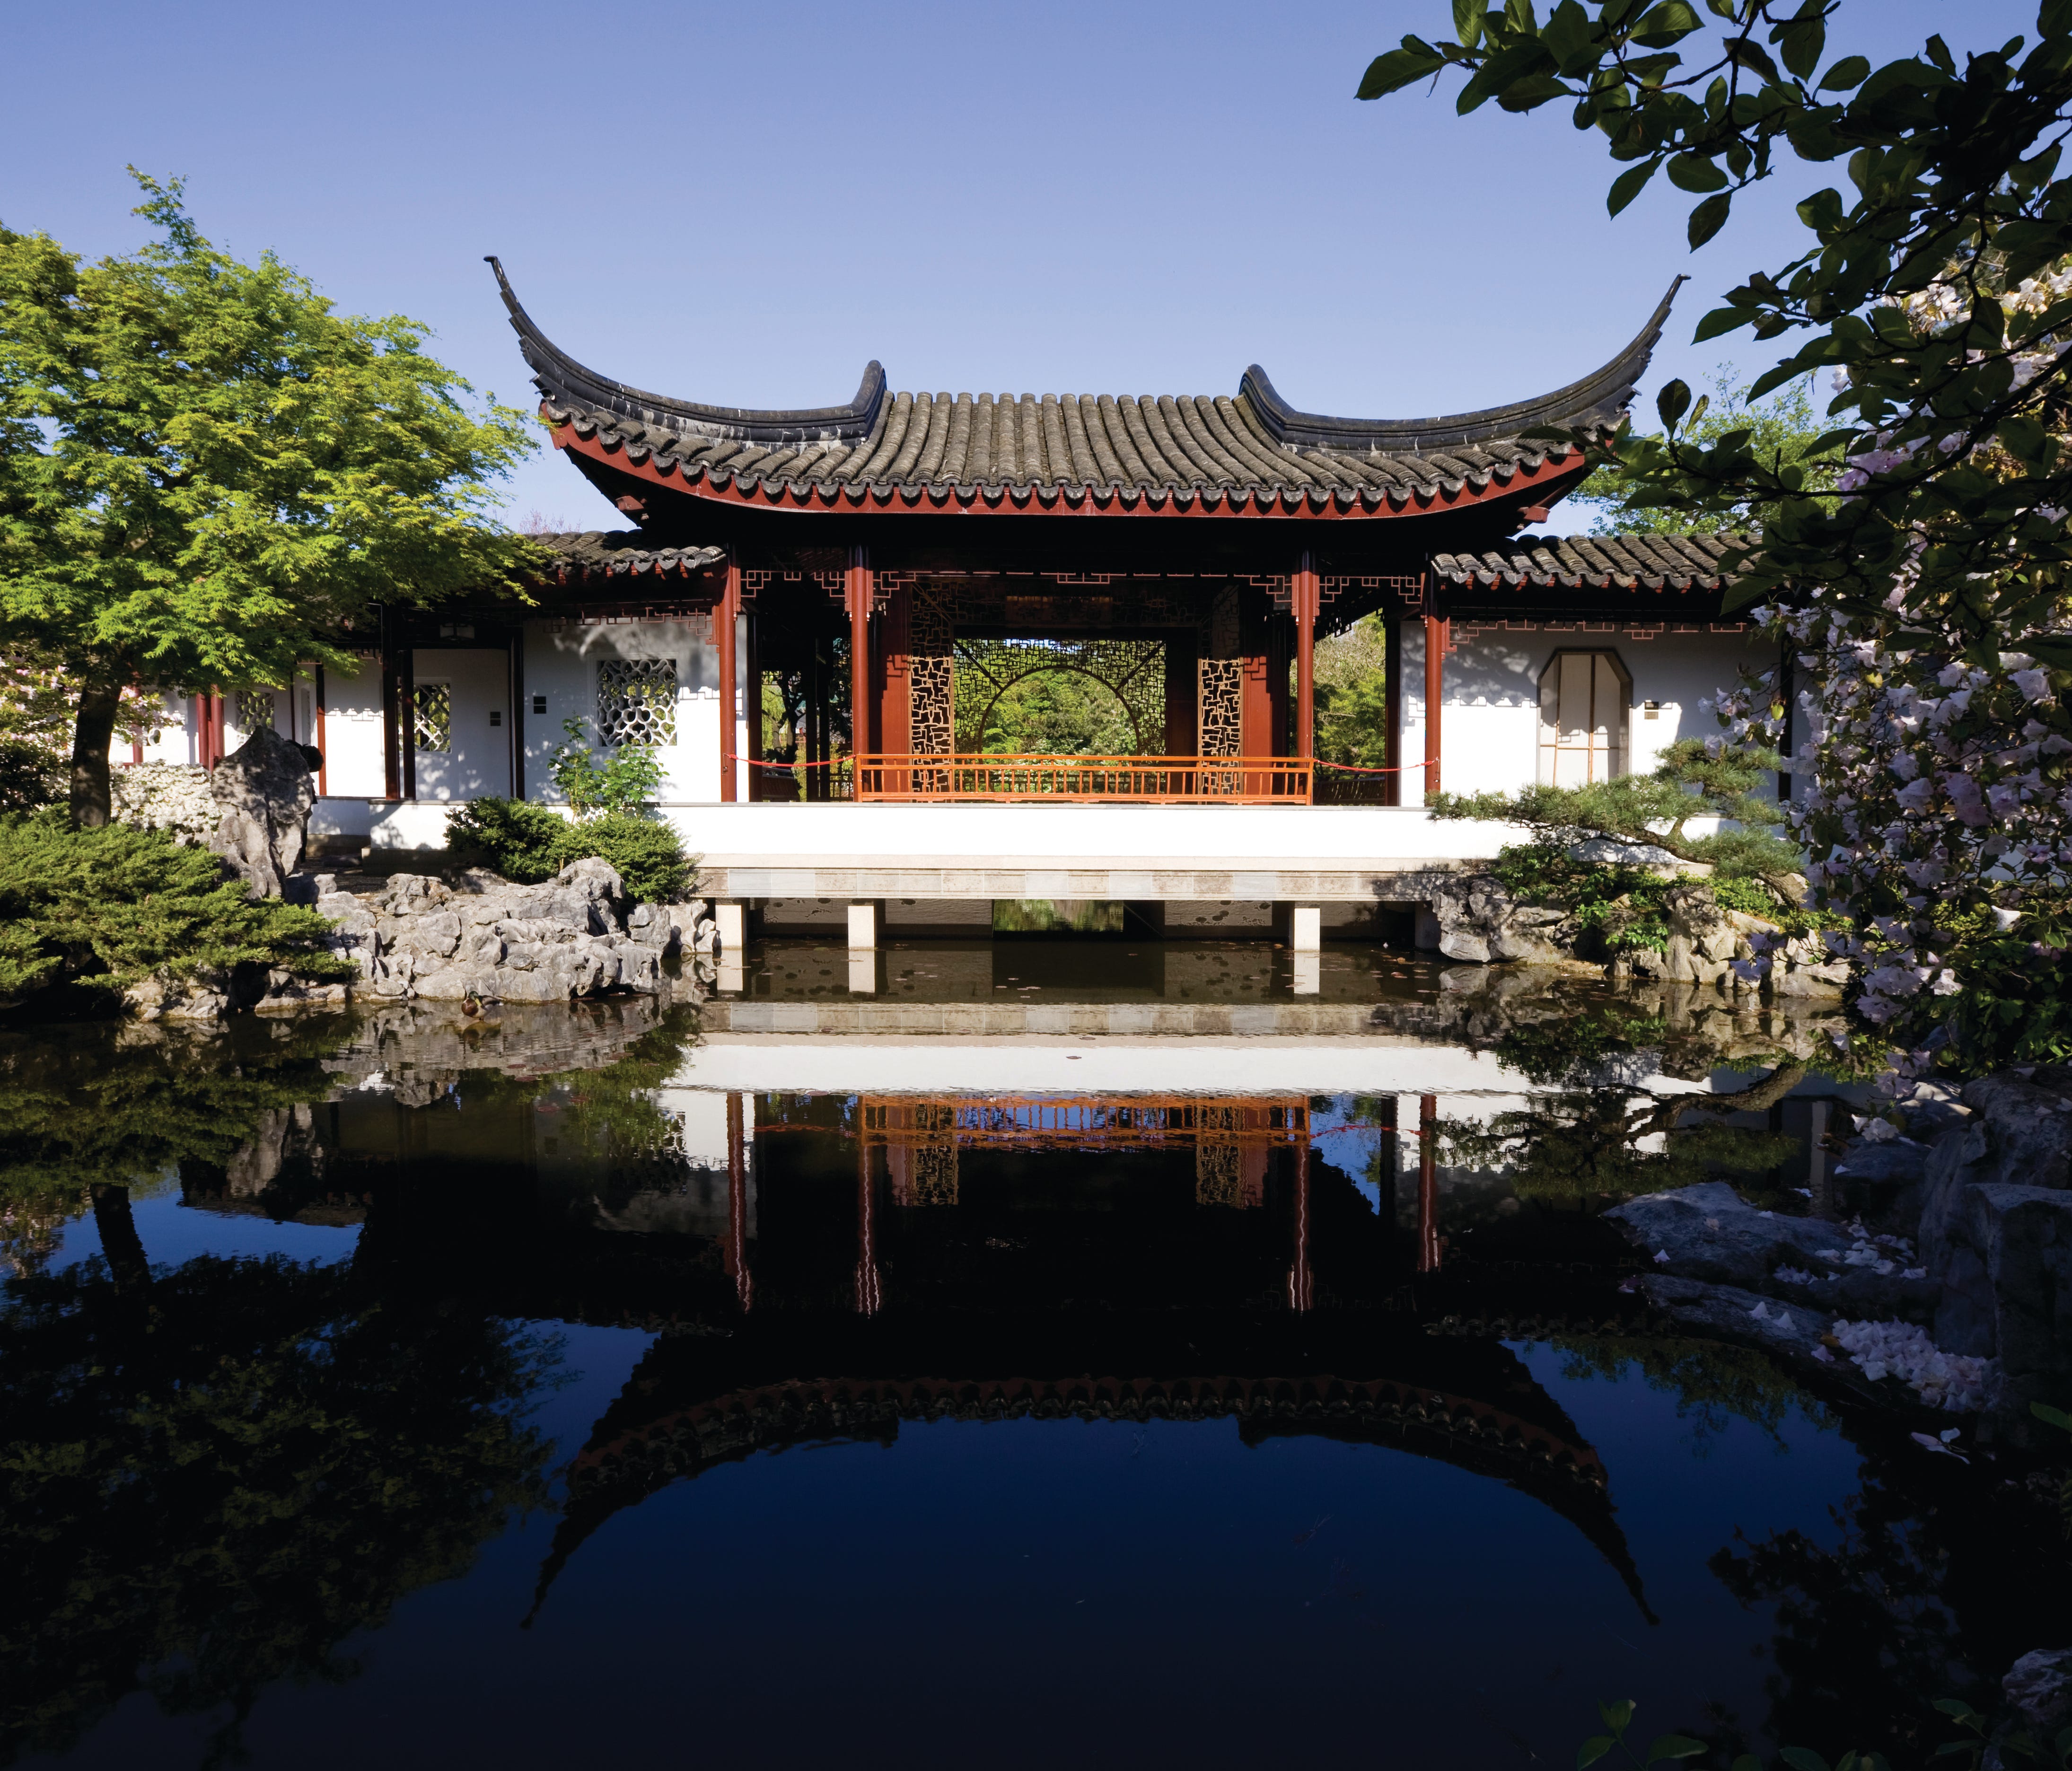 Dr. Sun Yat-Sen Classical Chinese Garden is the first authentic, full-scale garden of its kind built outside of China. Pictured here is the Jade Water Pavilion.